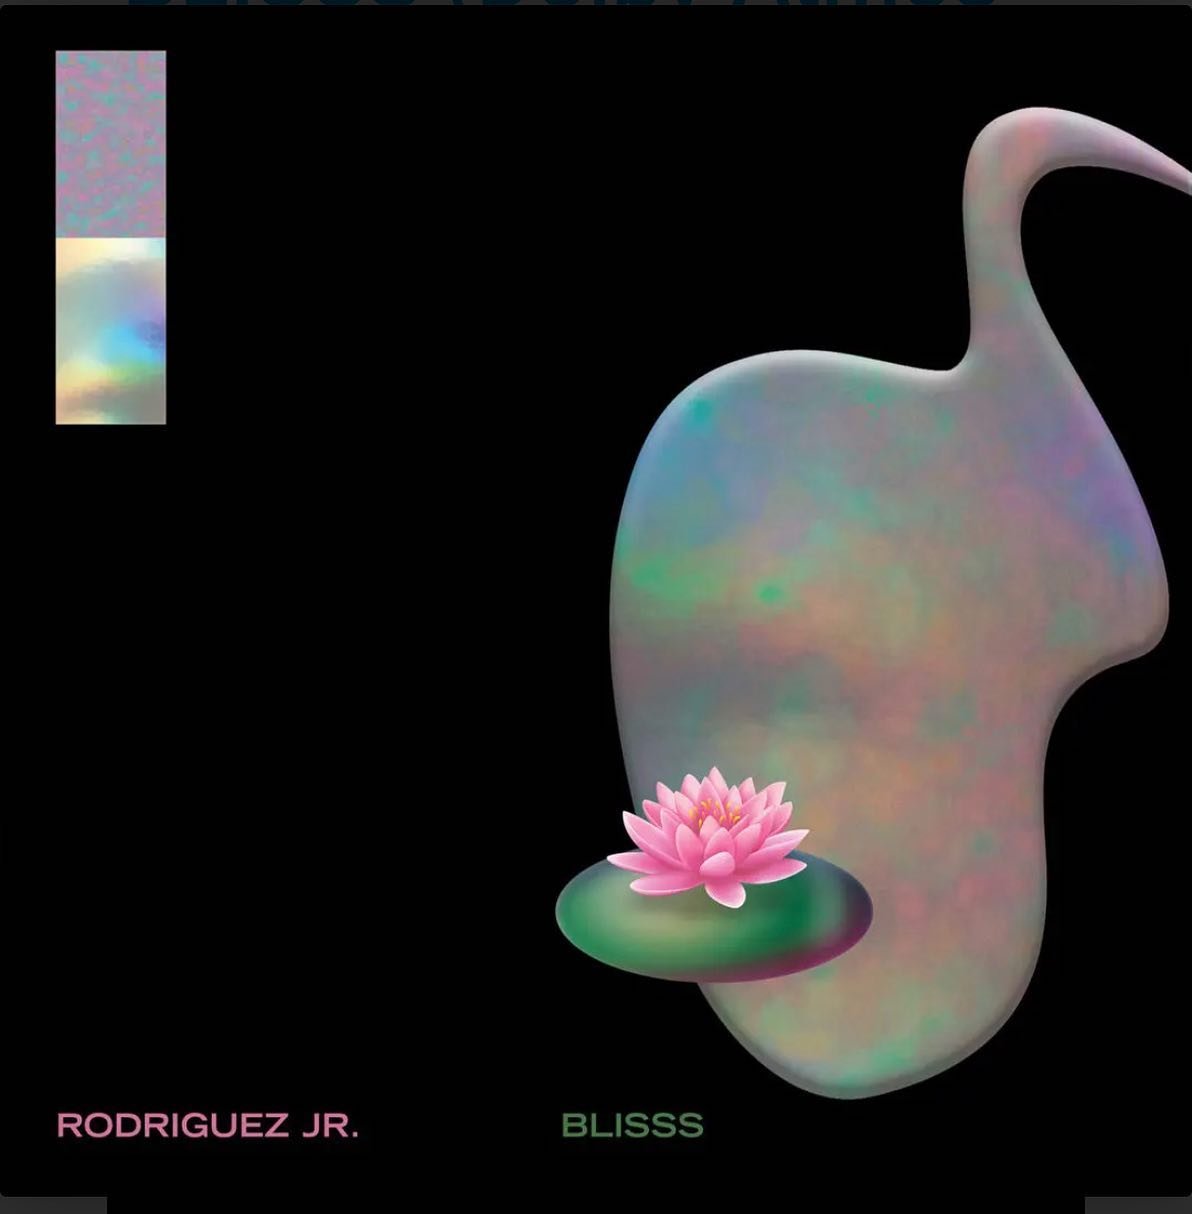 Happy to announce that @rodriguezjrmusic BLISSS is now available as #pureaudio Blu-ray on @pureaudio.recordings. Enjoy!
Link to store in Bio #spatialaudio #dolbyatmos #immersivemusic #pureaudiobluray